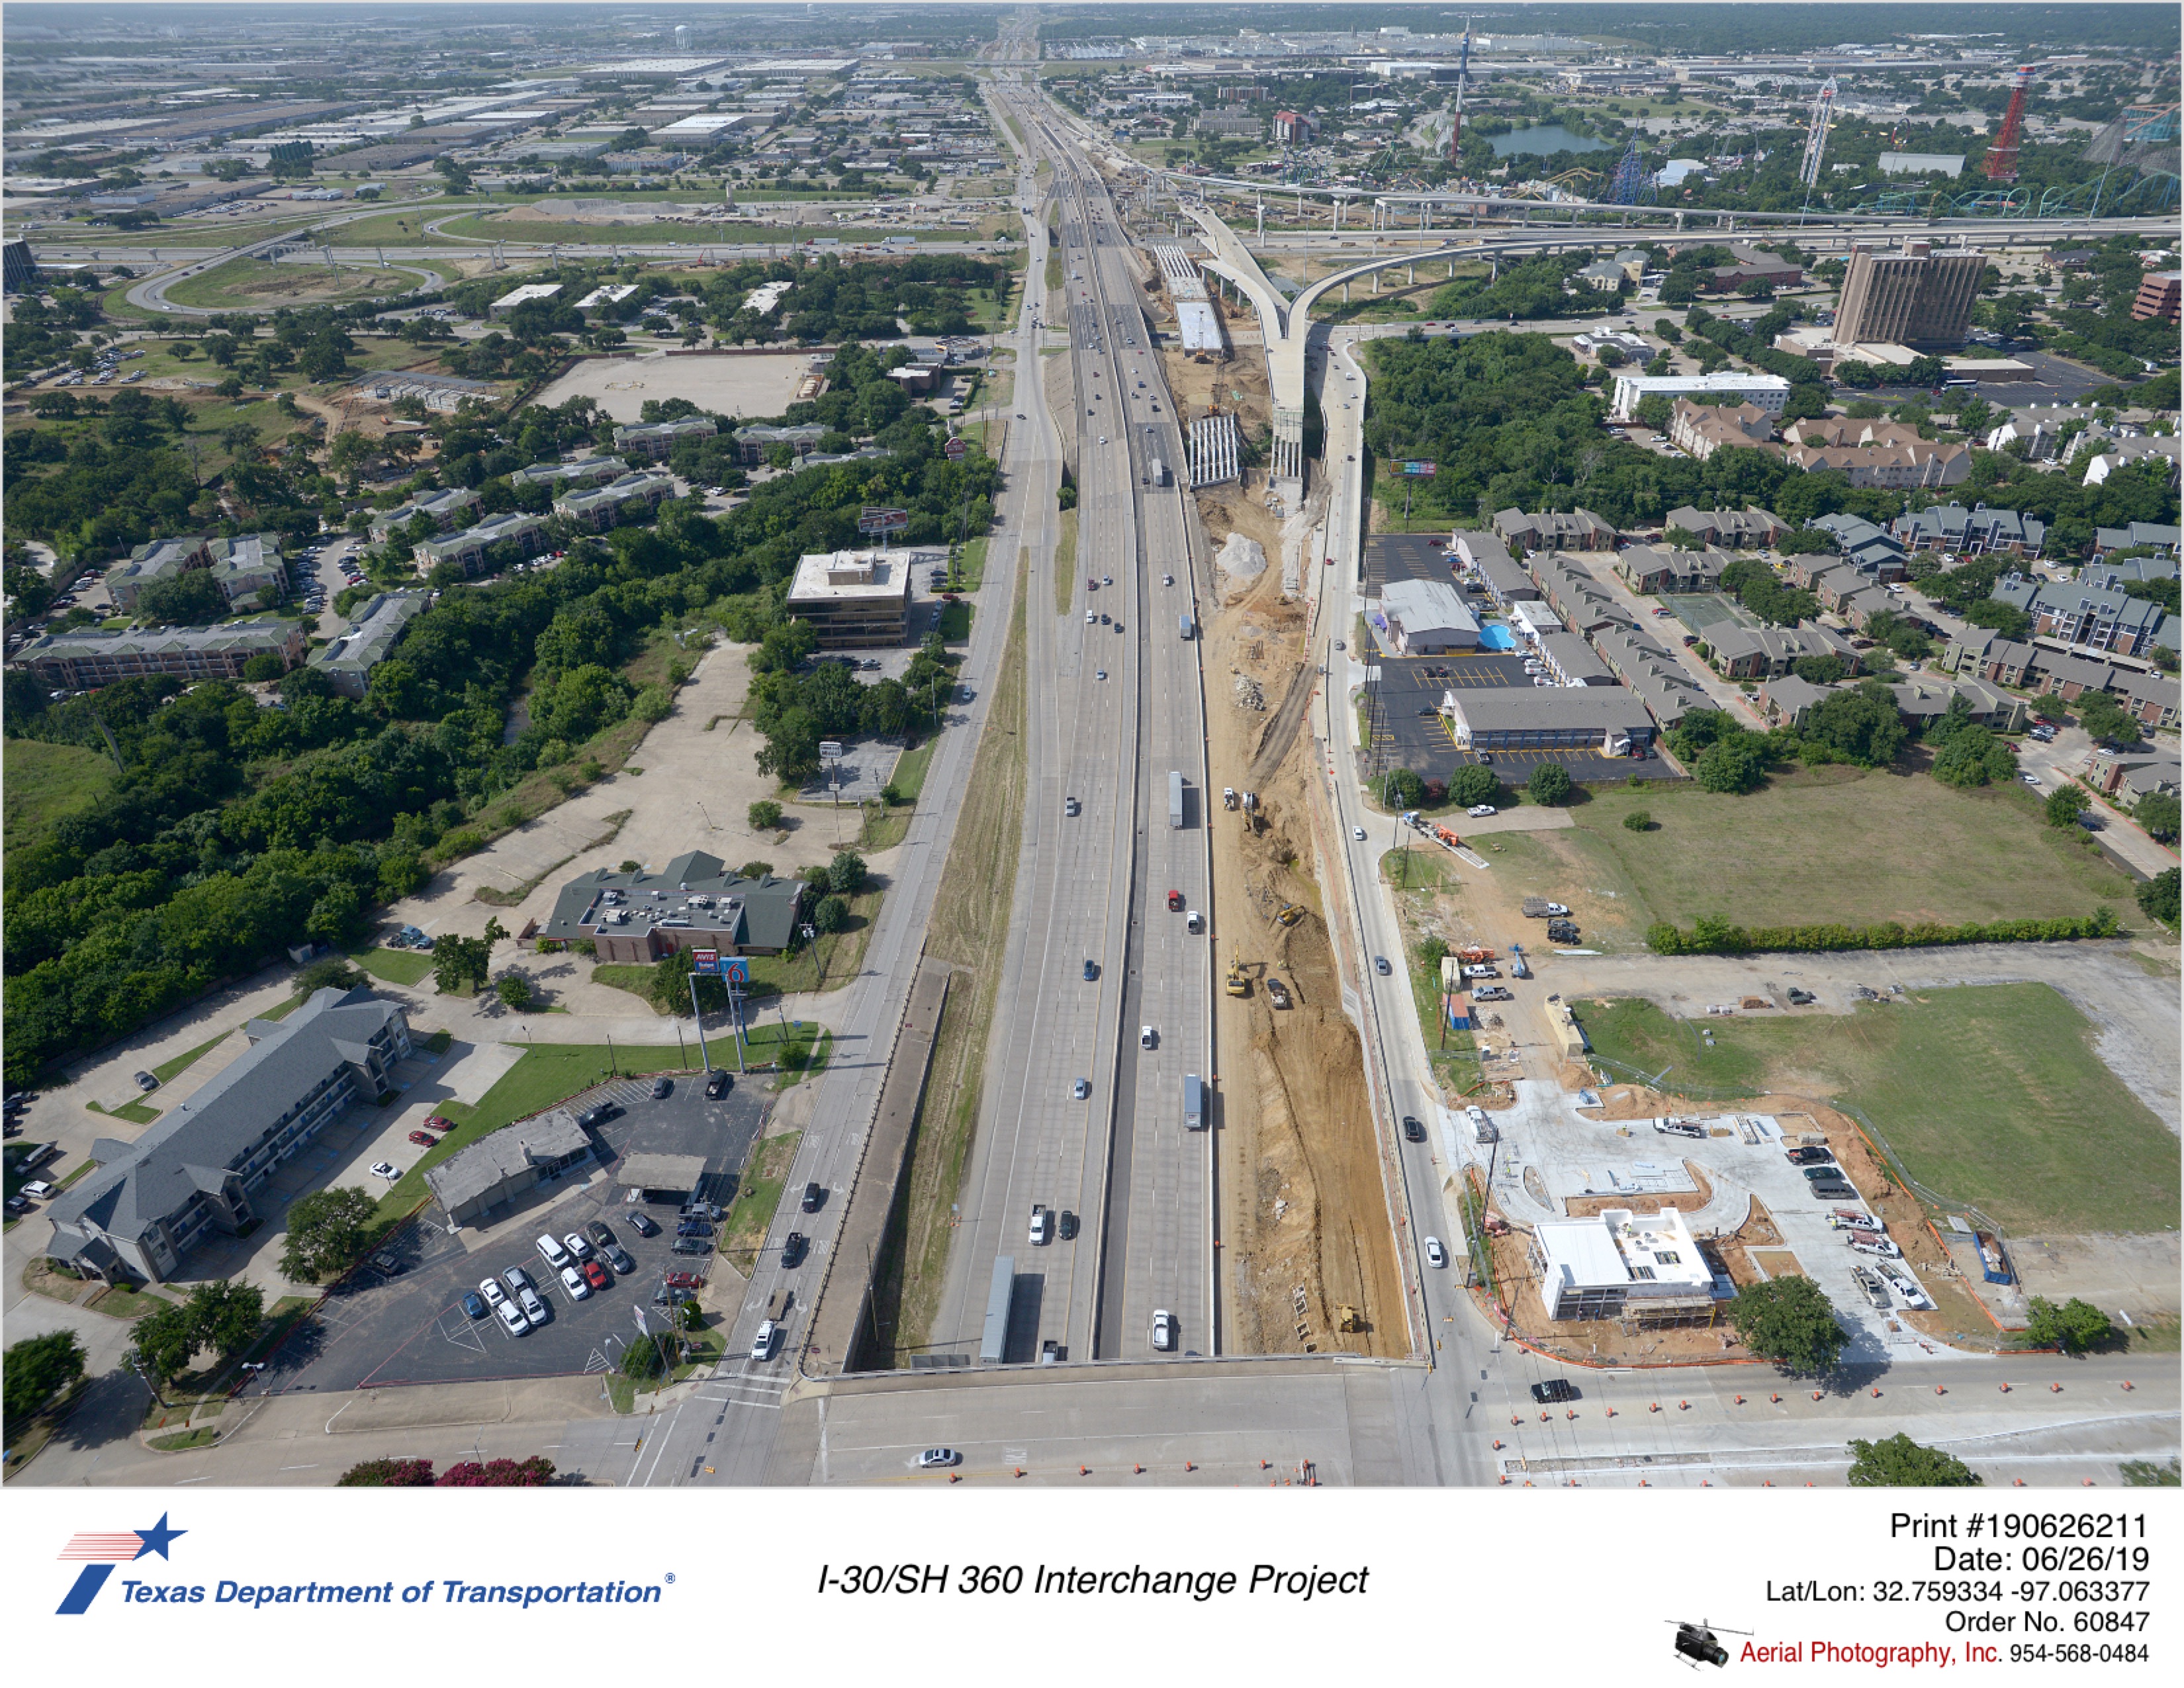 SH 360 looking south over Ave J. Construction of new SH 360 southbound main lanes and bridges seen.